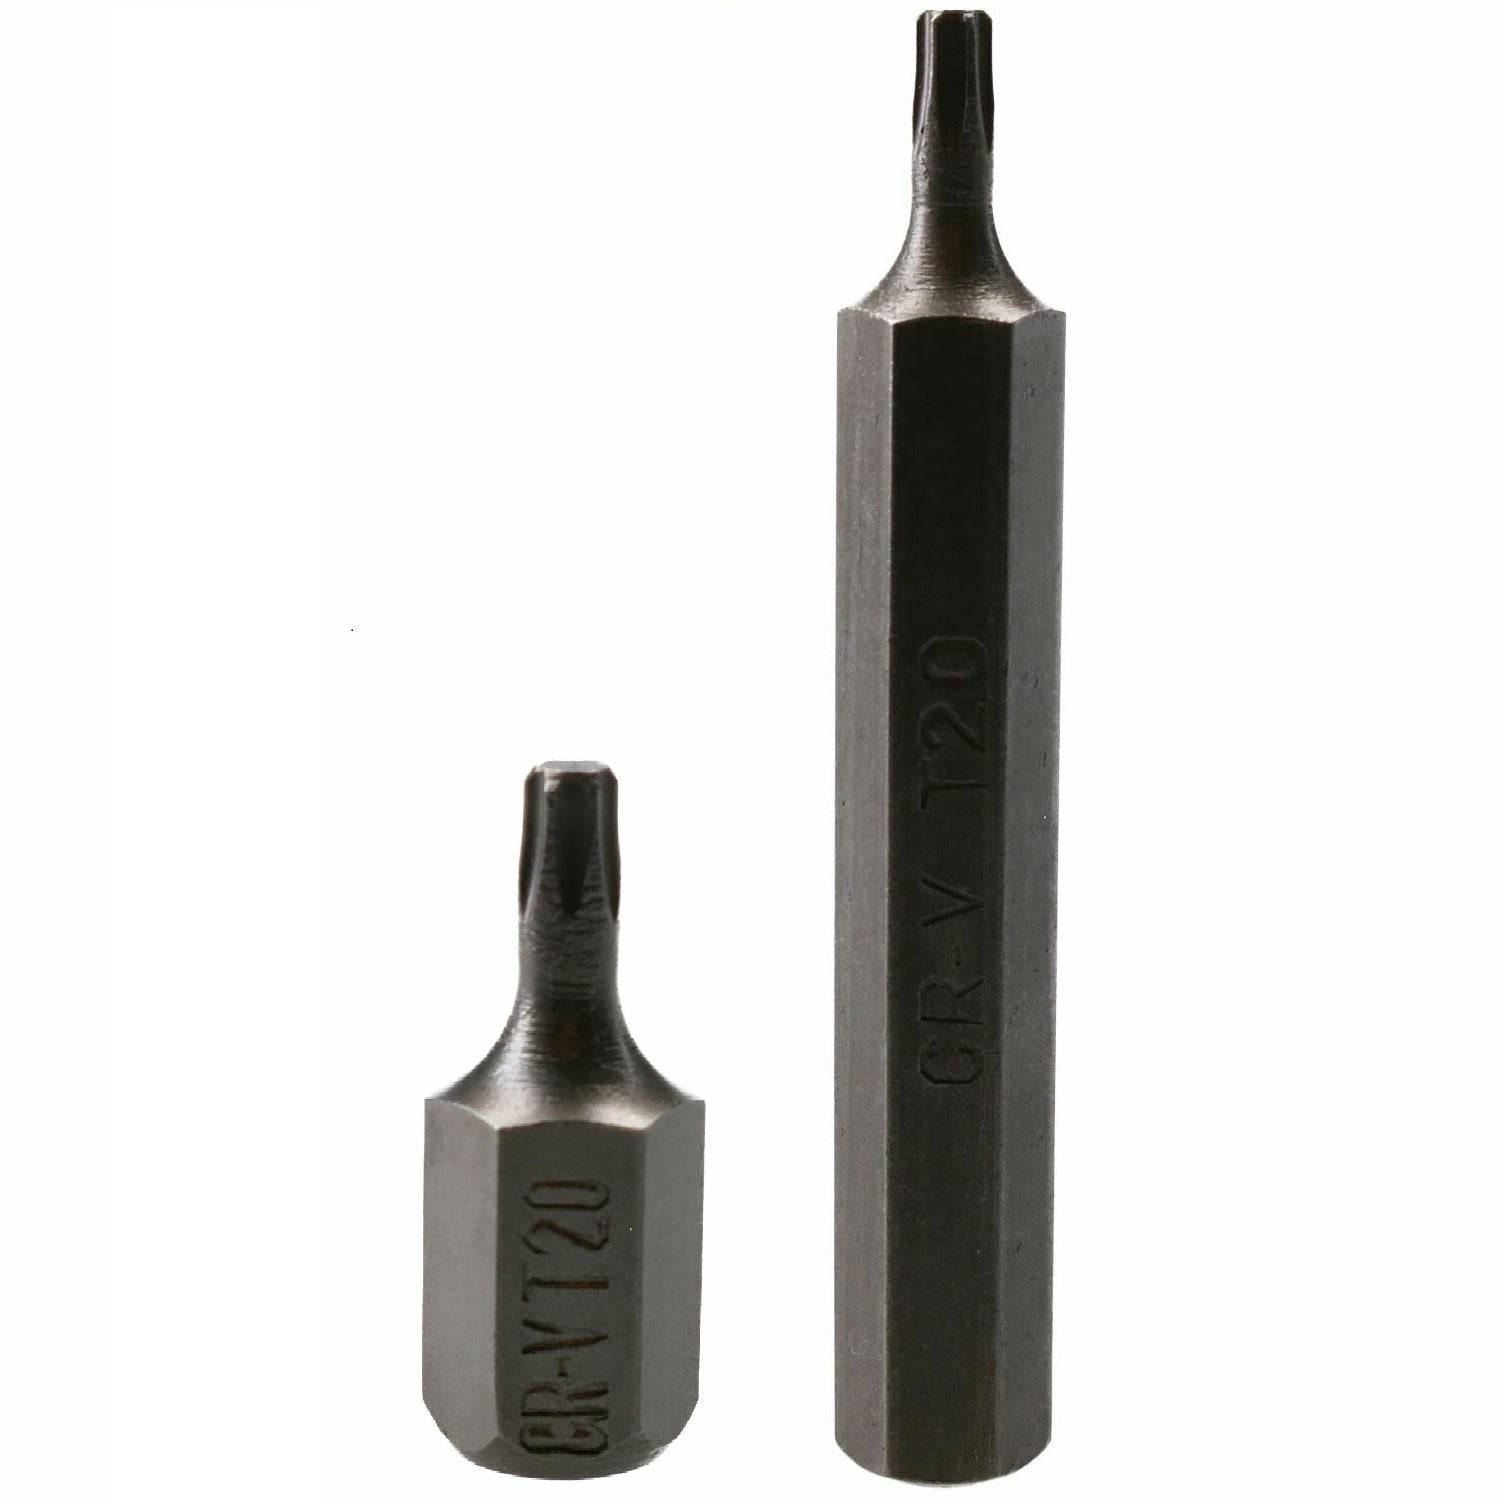 T20 – T60 Torx Star Male Bits With 10mm Shank 30mm or 75mm Length